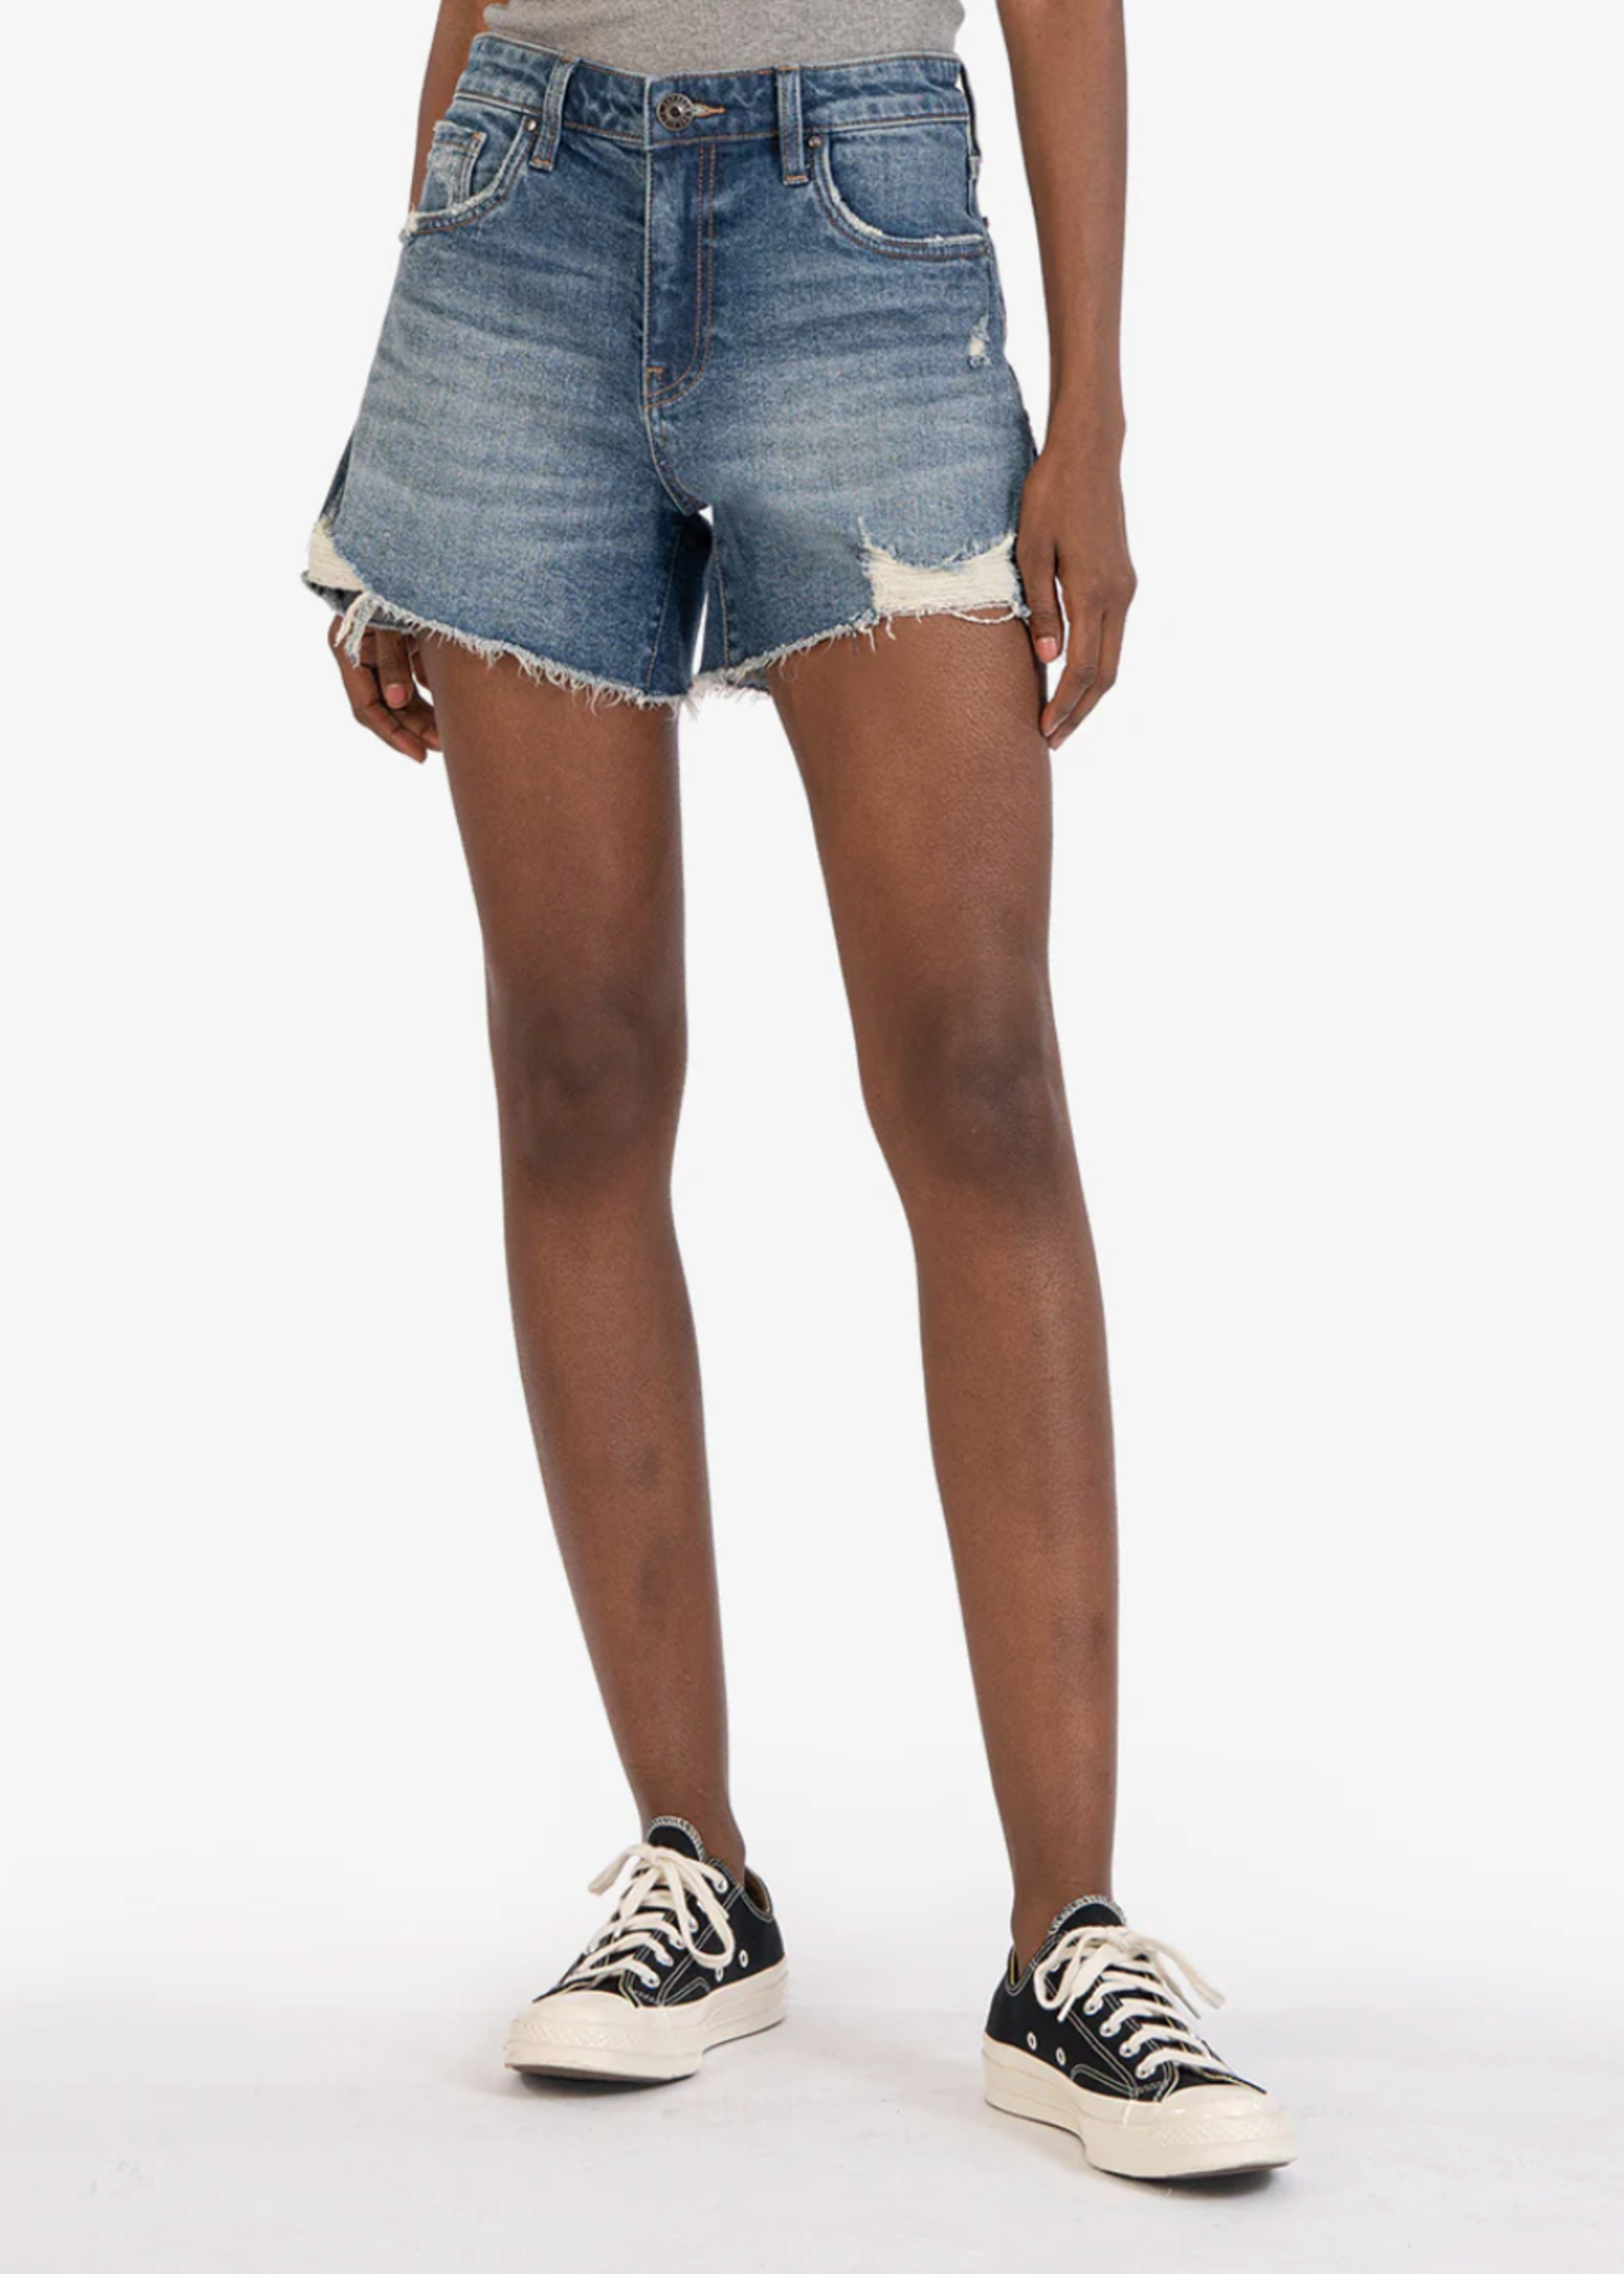 Kut from the Cloth Jane High Rise Long Short (Companion Wash)